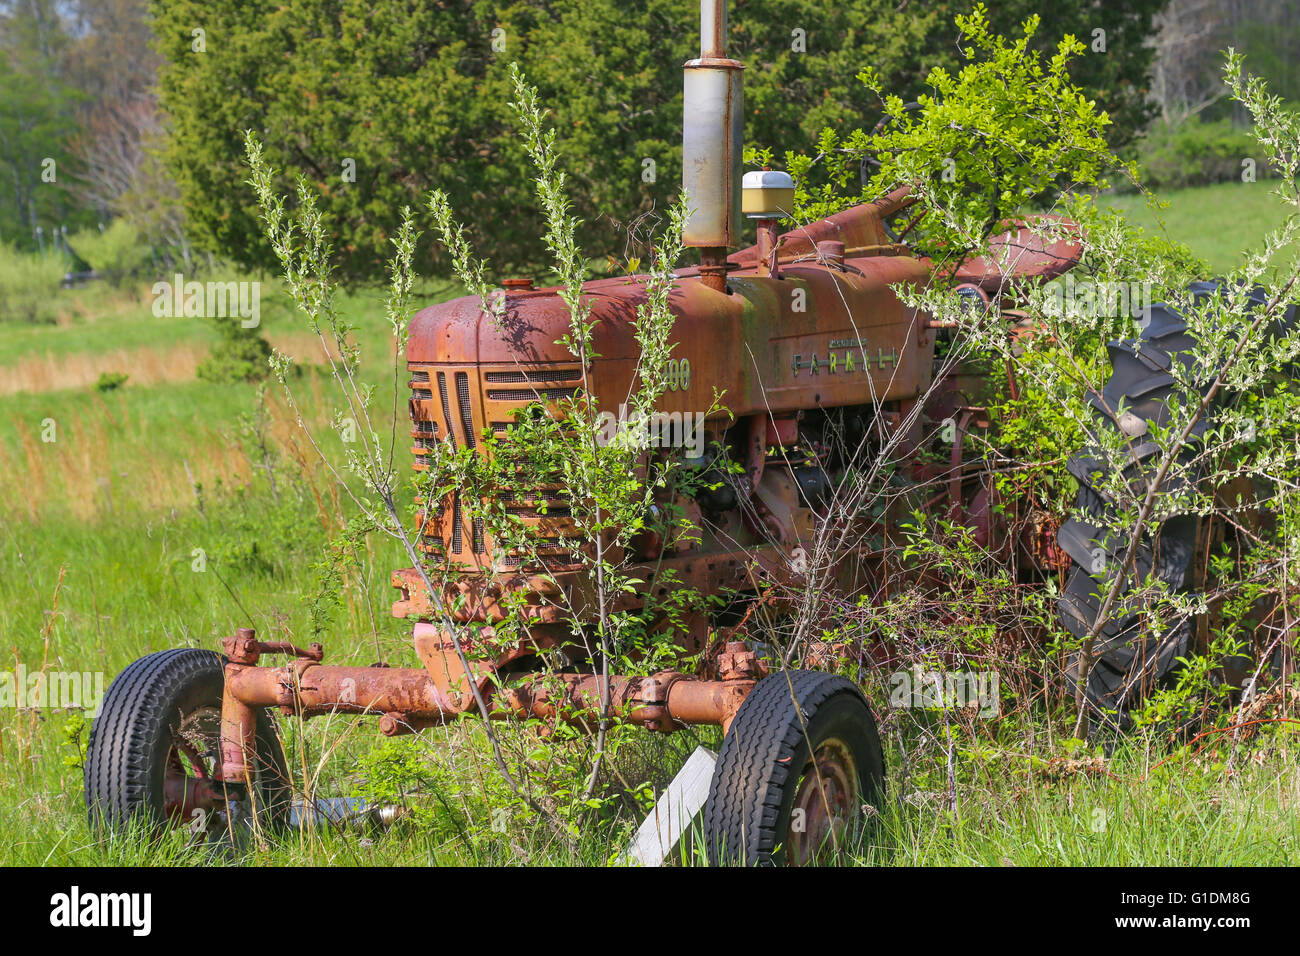 old red farm tractor sitting in an overgrown field Stock Photo